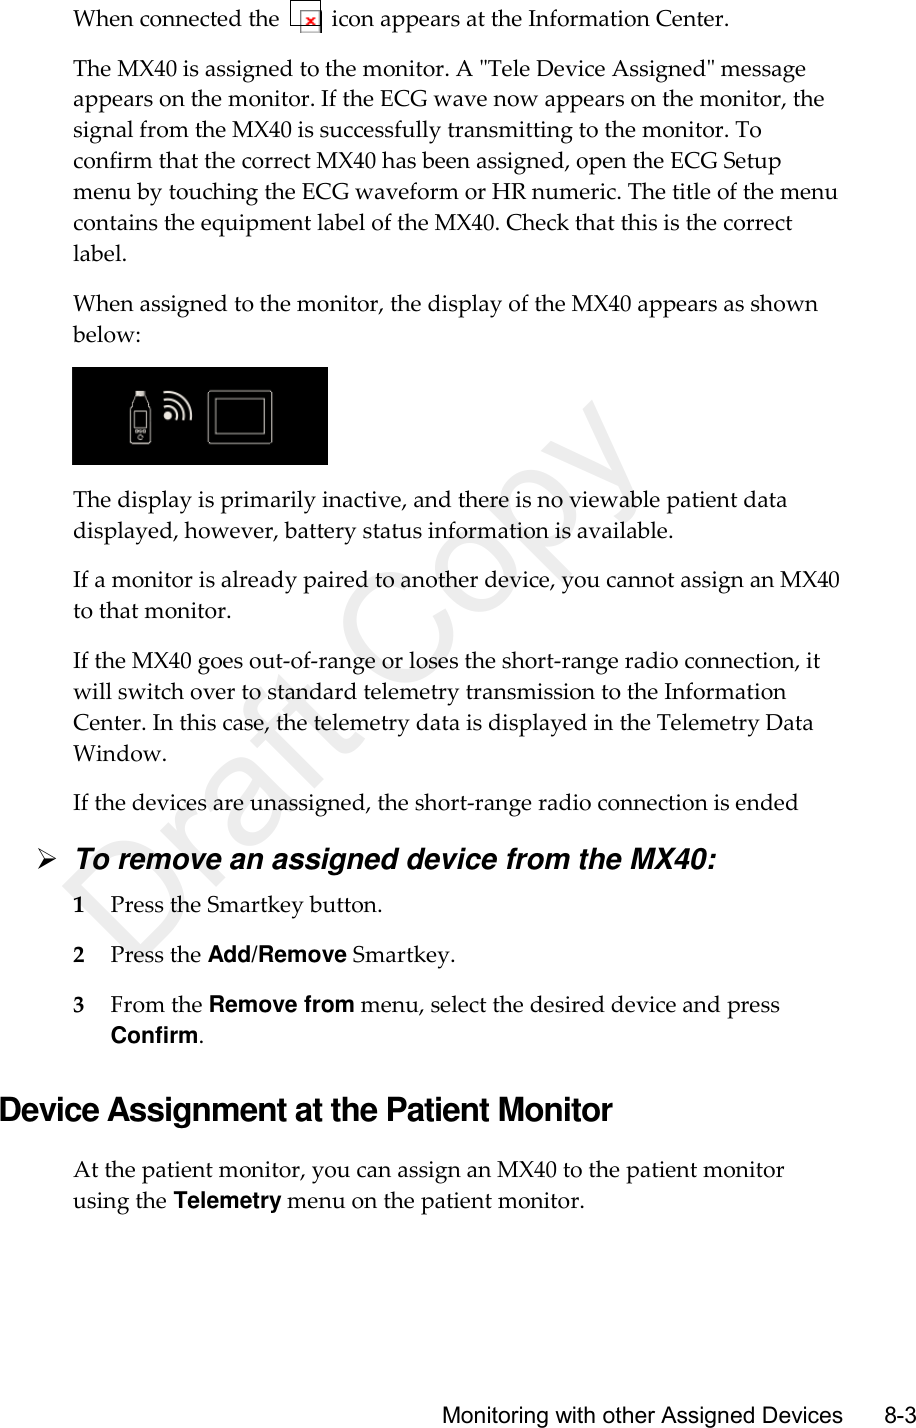      Monitoring with other Assigned Devices       8-3 When connected the    icon appears at the Information Center. The MX40 is assigned to the monitor. A &quot;Tele Device Assigned&quot; message appears on the monitor. If the ECG wave now appears on the monitor, the signal from the MX40 is successfully transmitting to the monitor. To confirm that the correct MX40 has been assigned, open the ECG Setup menu by touching the ECG waveform or HR numeric. The title of the menu contains the equipment label of the MX40. Check that this is the correct label. When assigned to the monitor, the display of the MX40 appears as shown below:  The display is primarily inactive, and there is no viewable patient data displayed, however, battery status information is available. If a monitor is already paired to another device, you cannot assign an MX40 to that monitor. If the MX40 goes out-of-range or loses the short-range radio connection, it will switch over to standard telemetry transmission to the Information Center. In this case, the telemetry data is displayed in the Telemetry Data Window. If the devices are unassigned, the short-range radio connection is ended  To remove an assigned device from the MX40: 1 Press the Smartkey button. 2 Press the Add/Remove Smartkey. 3 From the Remove from menu, select the desired device and press Confirm.  Device Assignment at the Patient Monitor At the patient monitor, you can assign an MX40 to the patient monitor using the Telemetry menu on the patient monitor. Draft Copy